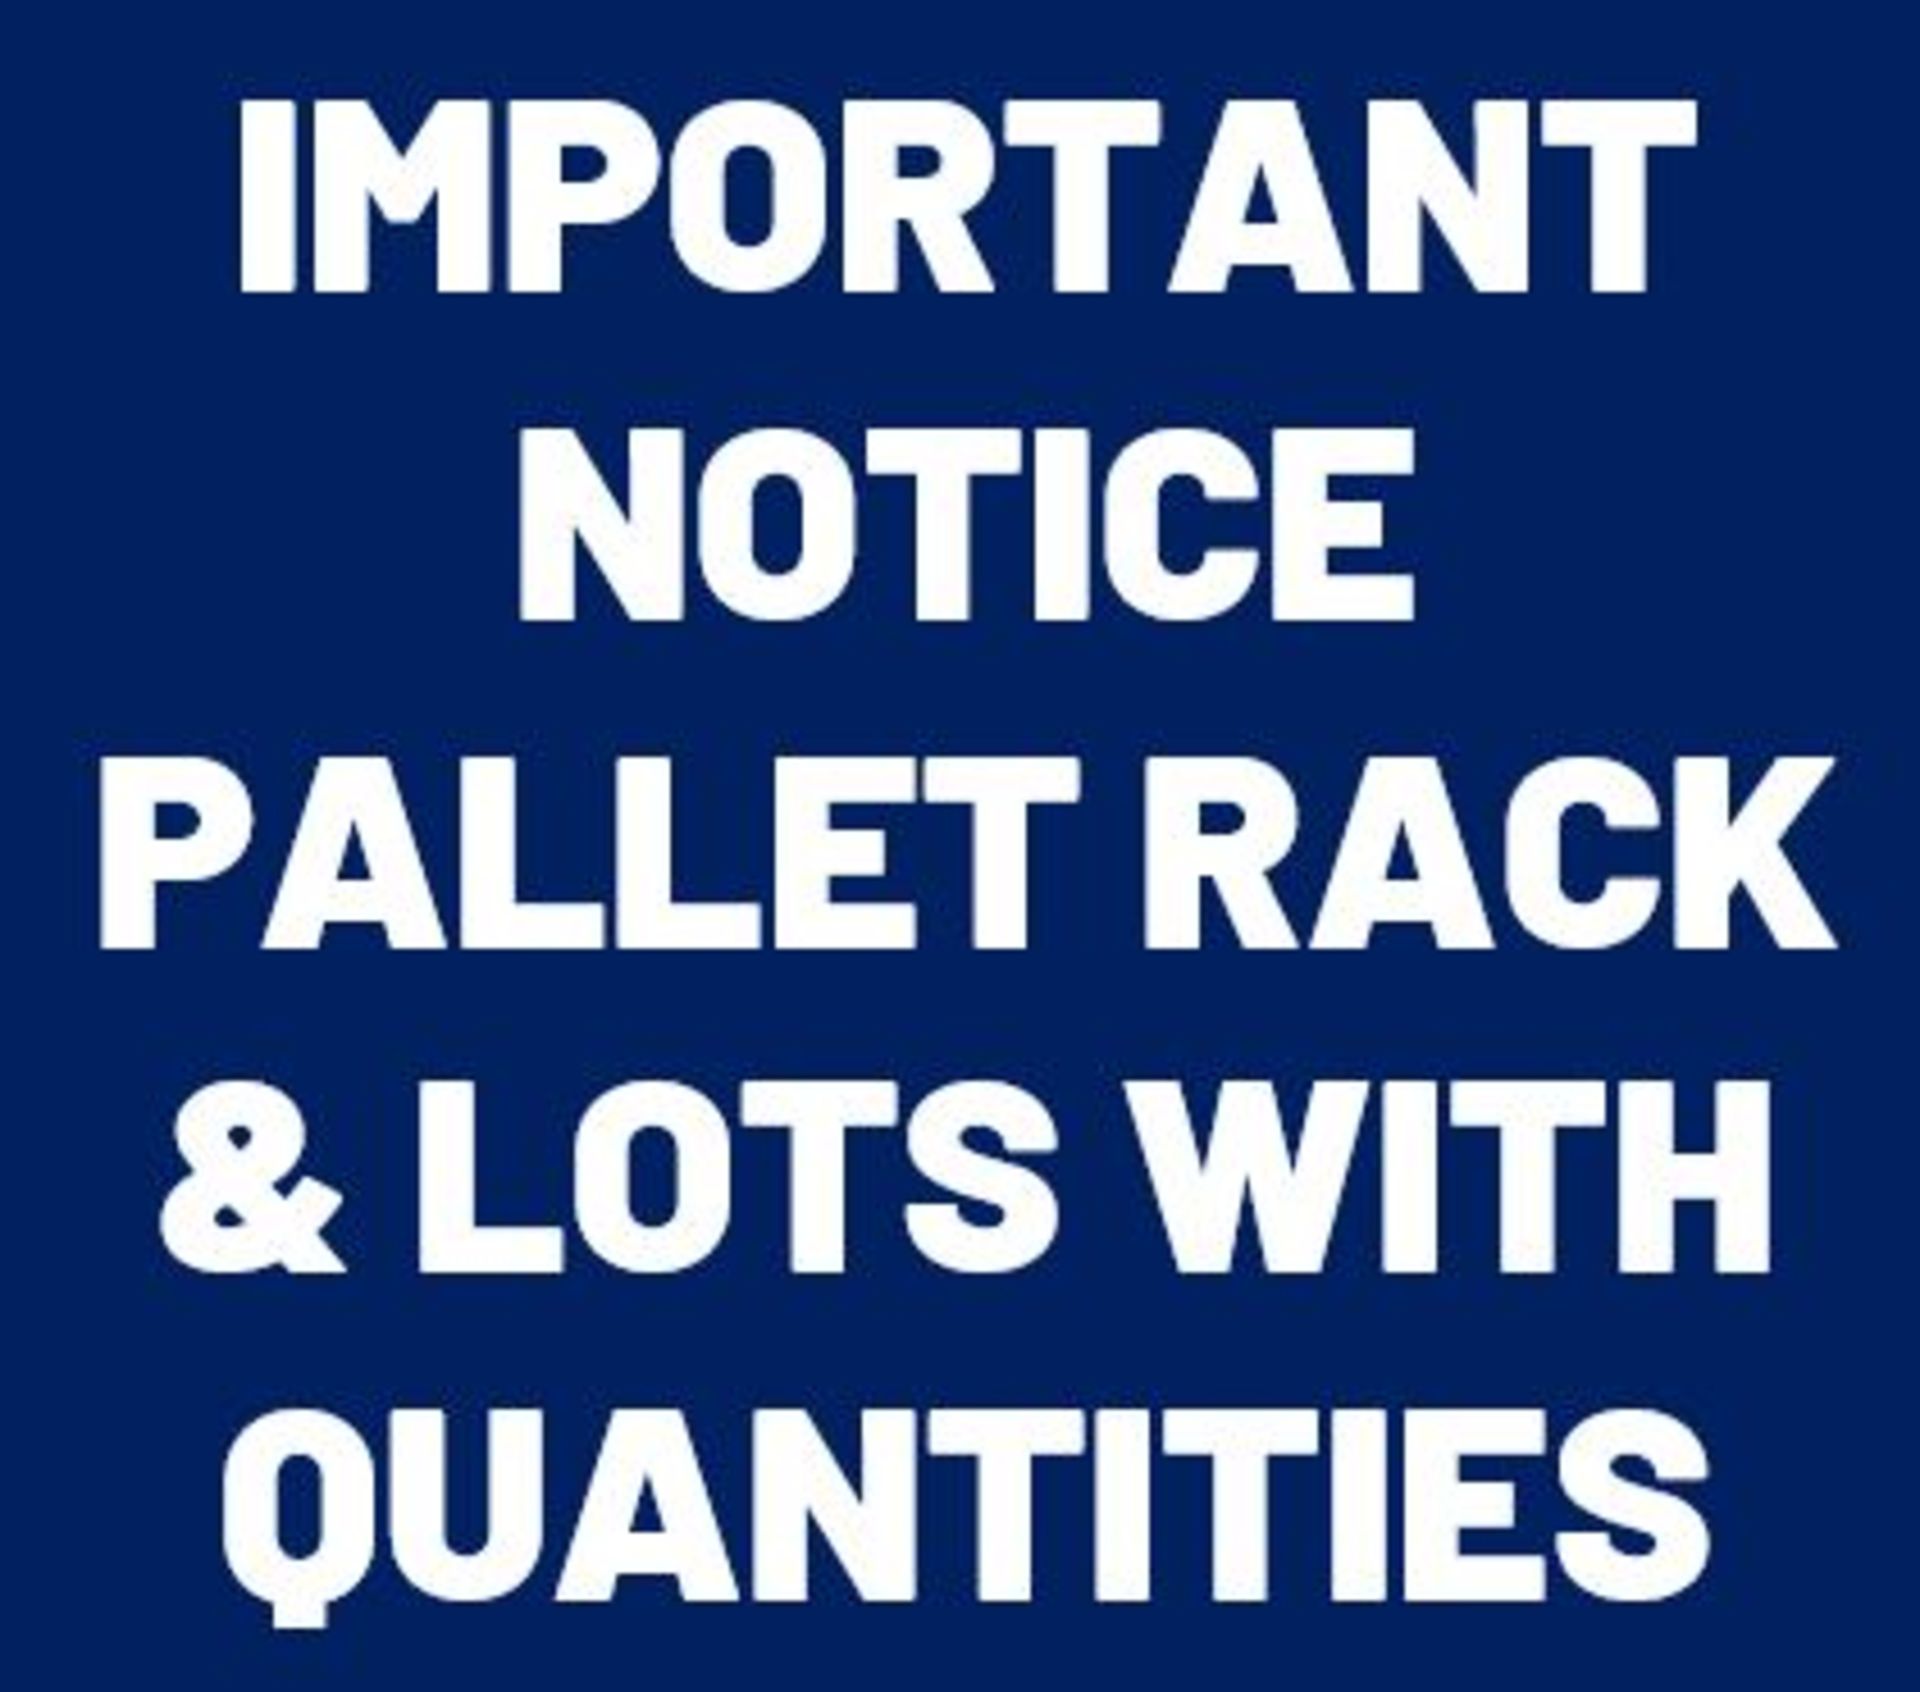 IMPORTANT NOTICE – On lots with a quantity your bid will be multiplied by that amount.